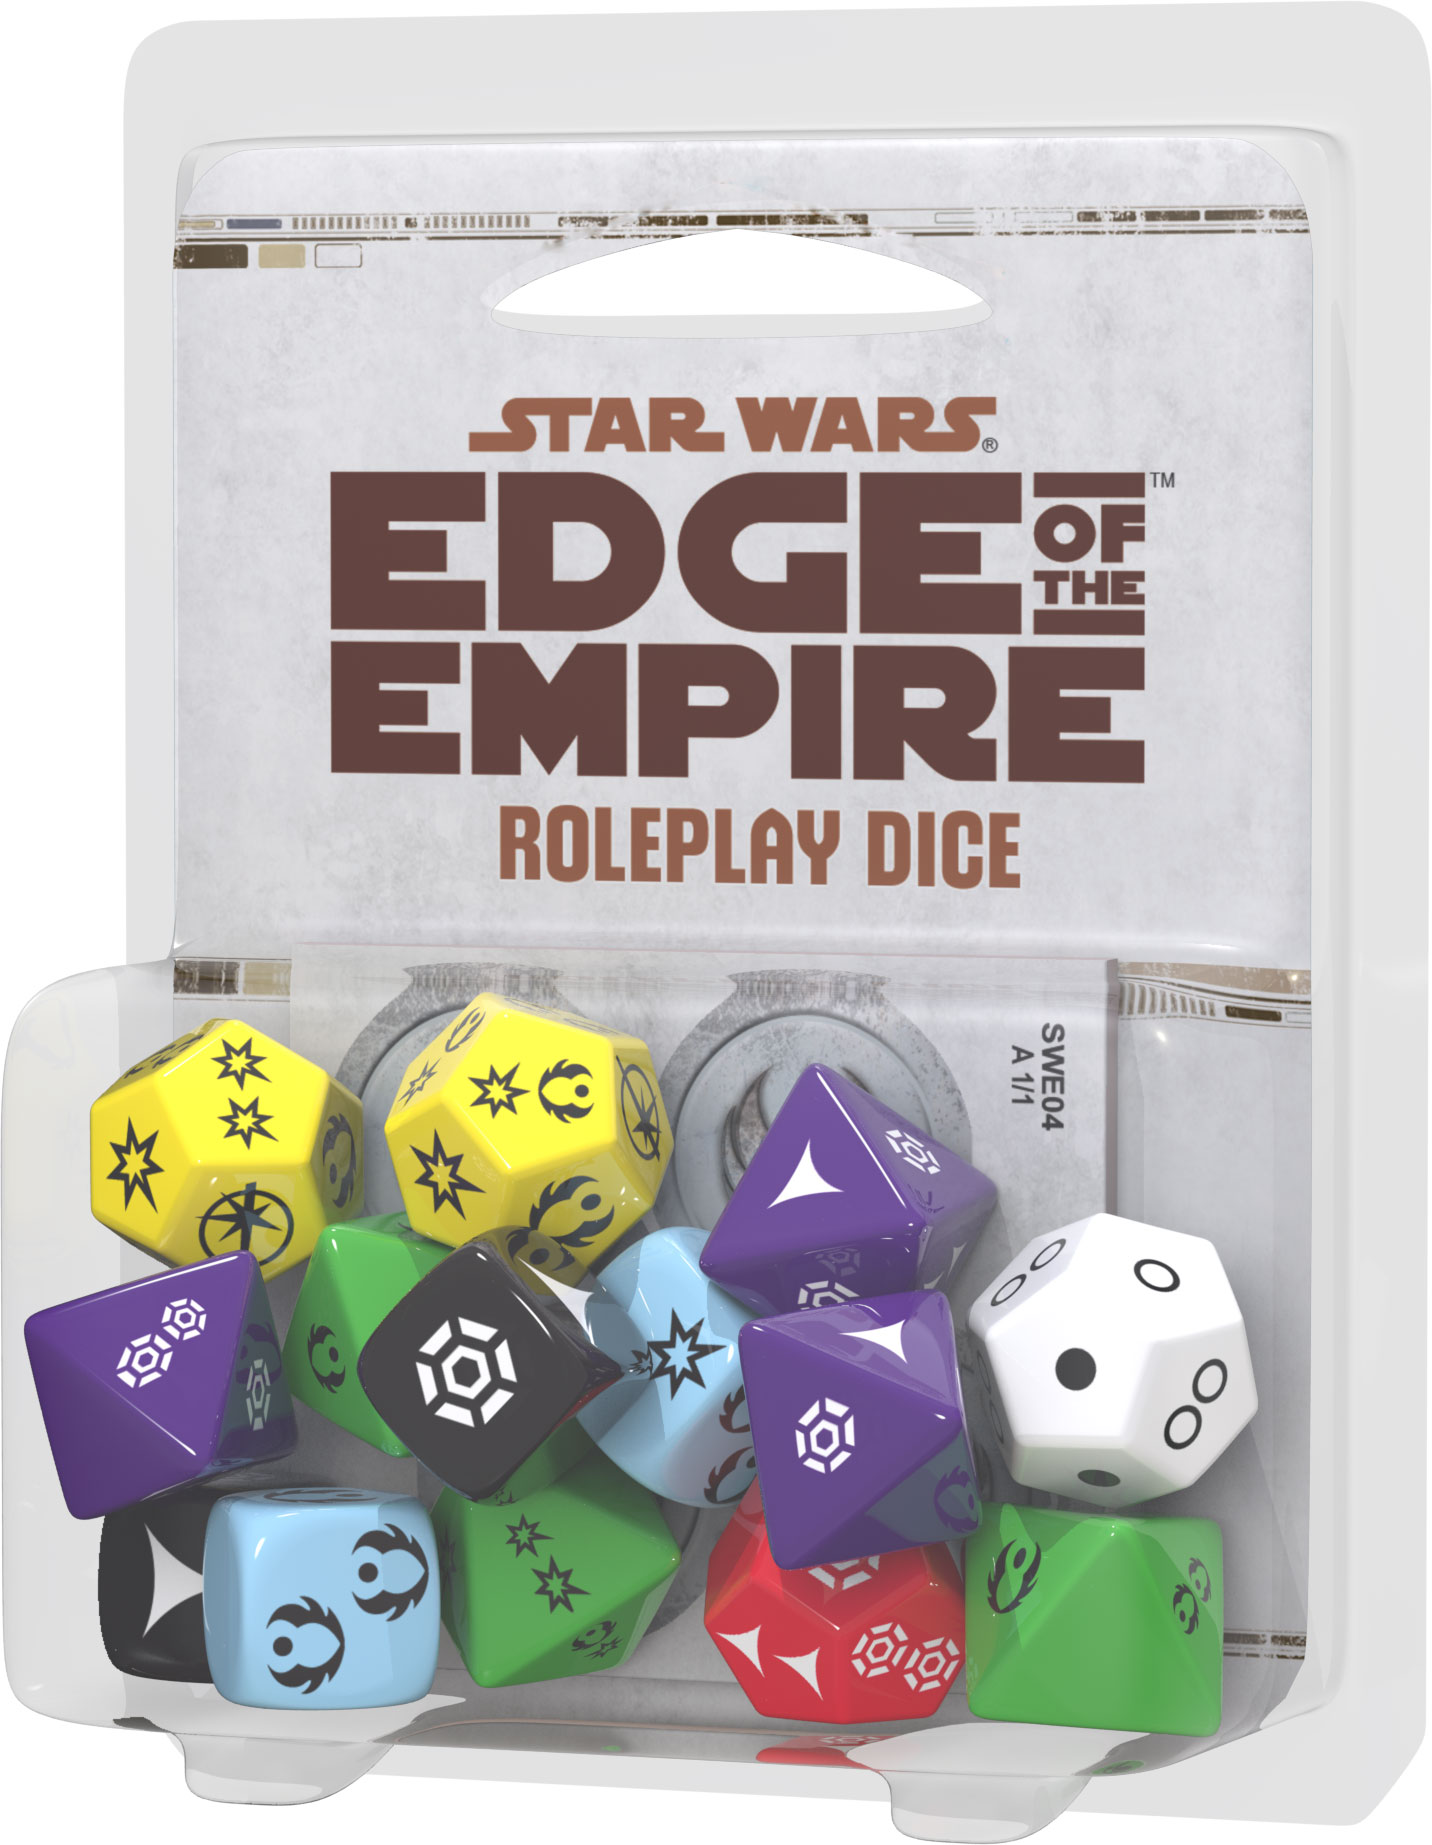 The Roleplay Dice pack leads players through surprising turns of events, while empowering them to explore the consequences of their actions and further the development of their characters.